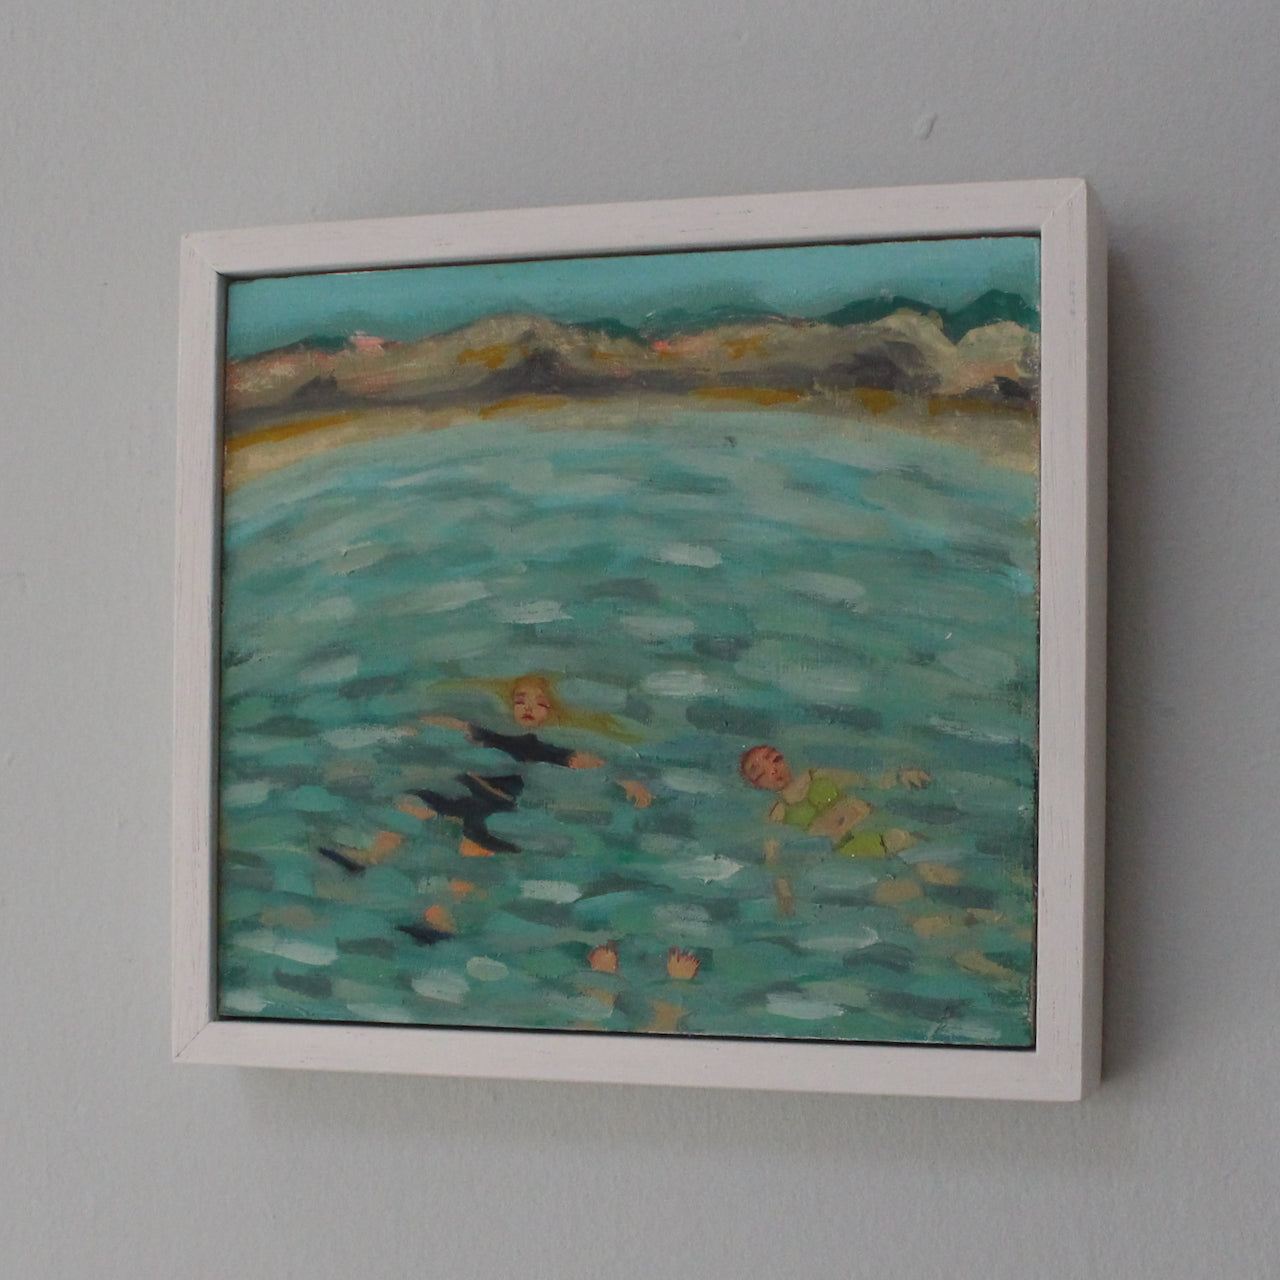 framed painting of people floating in blue and turquoise water by Cornish artist Siobhan Purdya painting of people floating in blue and turquoise water by  artist Siobhan Purdy